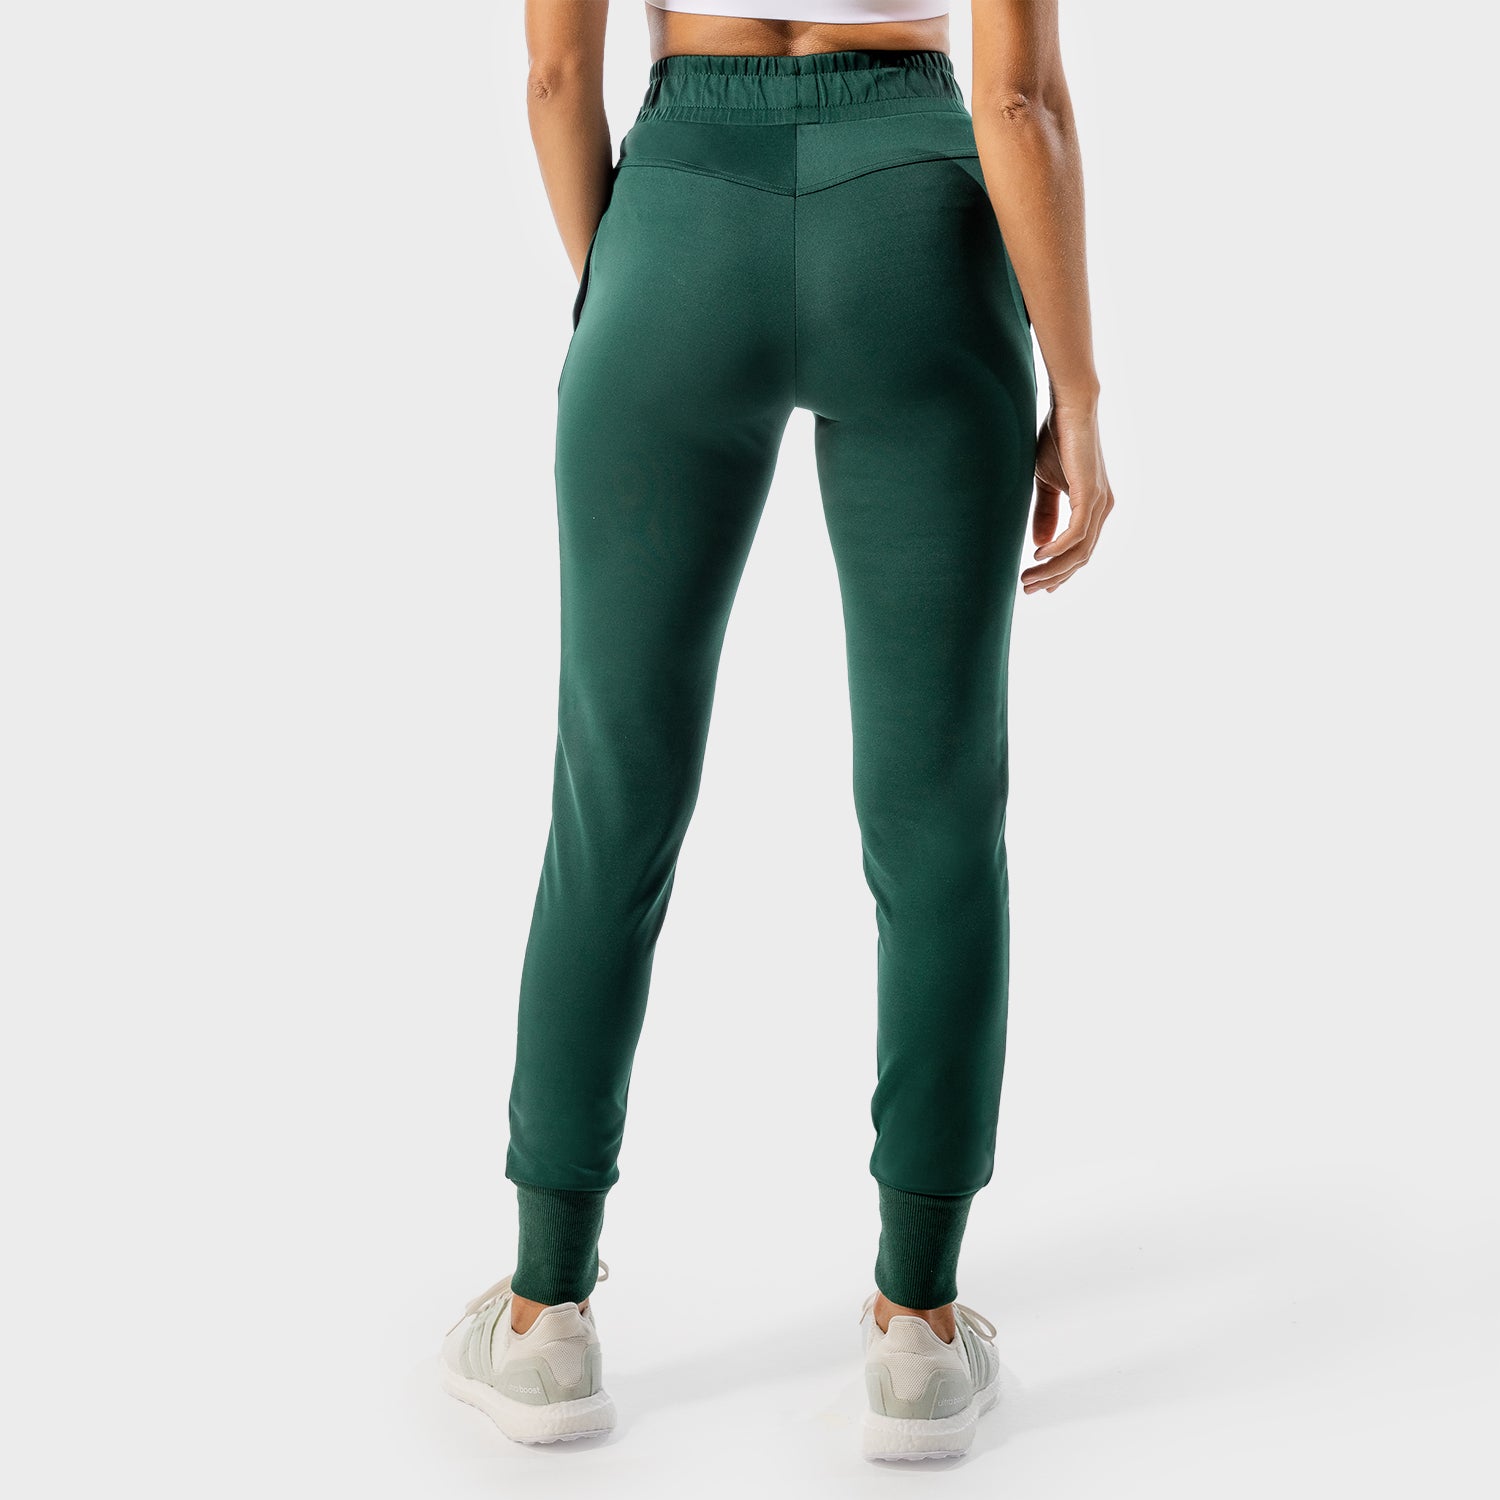 squatwolf-gym-pants-for-women-she-wolf-do-knot-joggers-bottle-green-workout-clothes